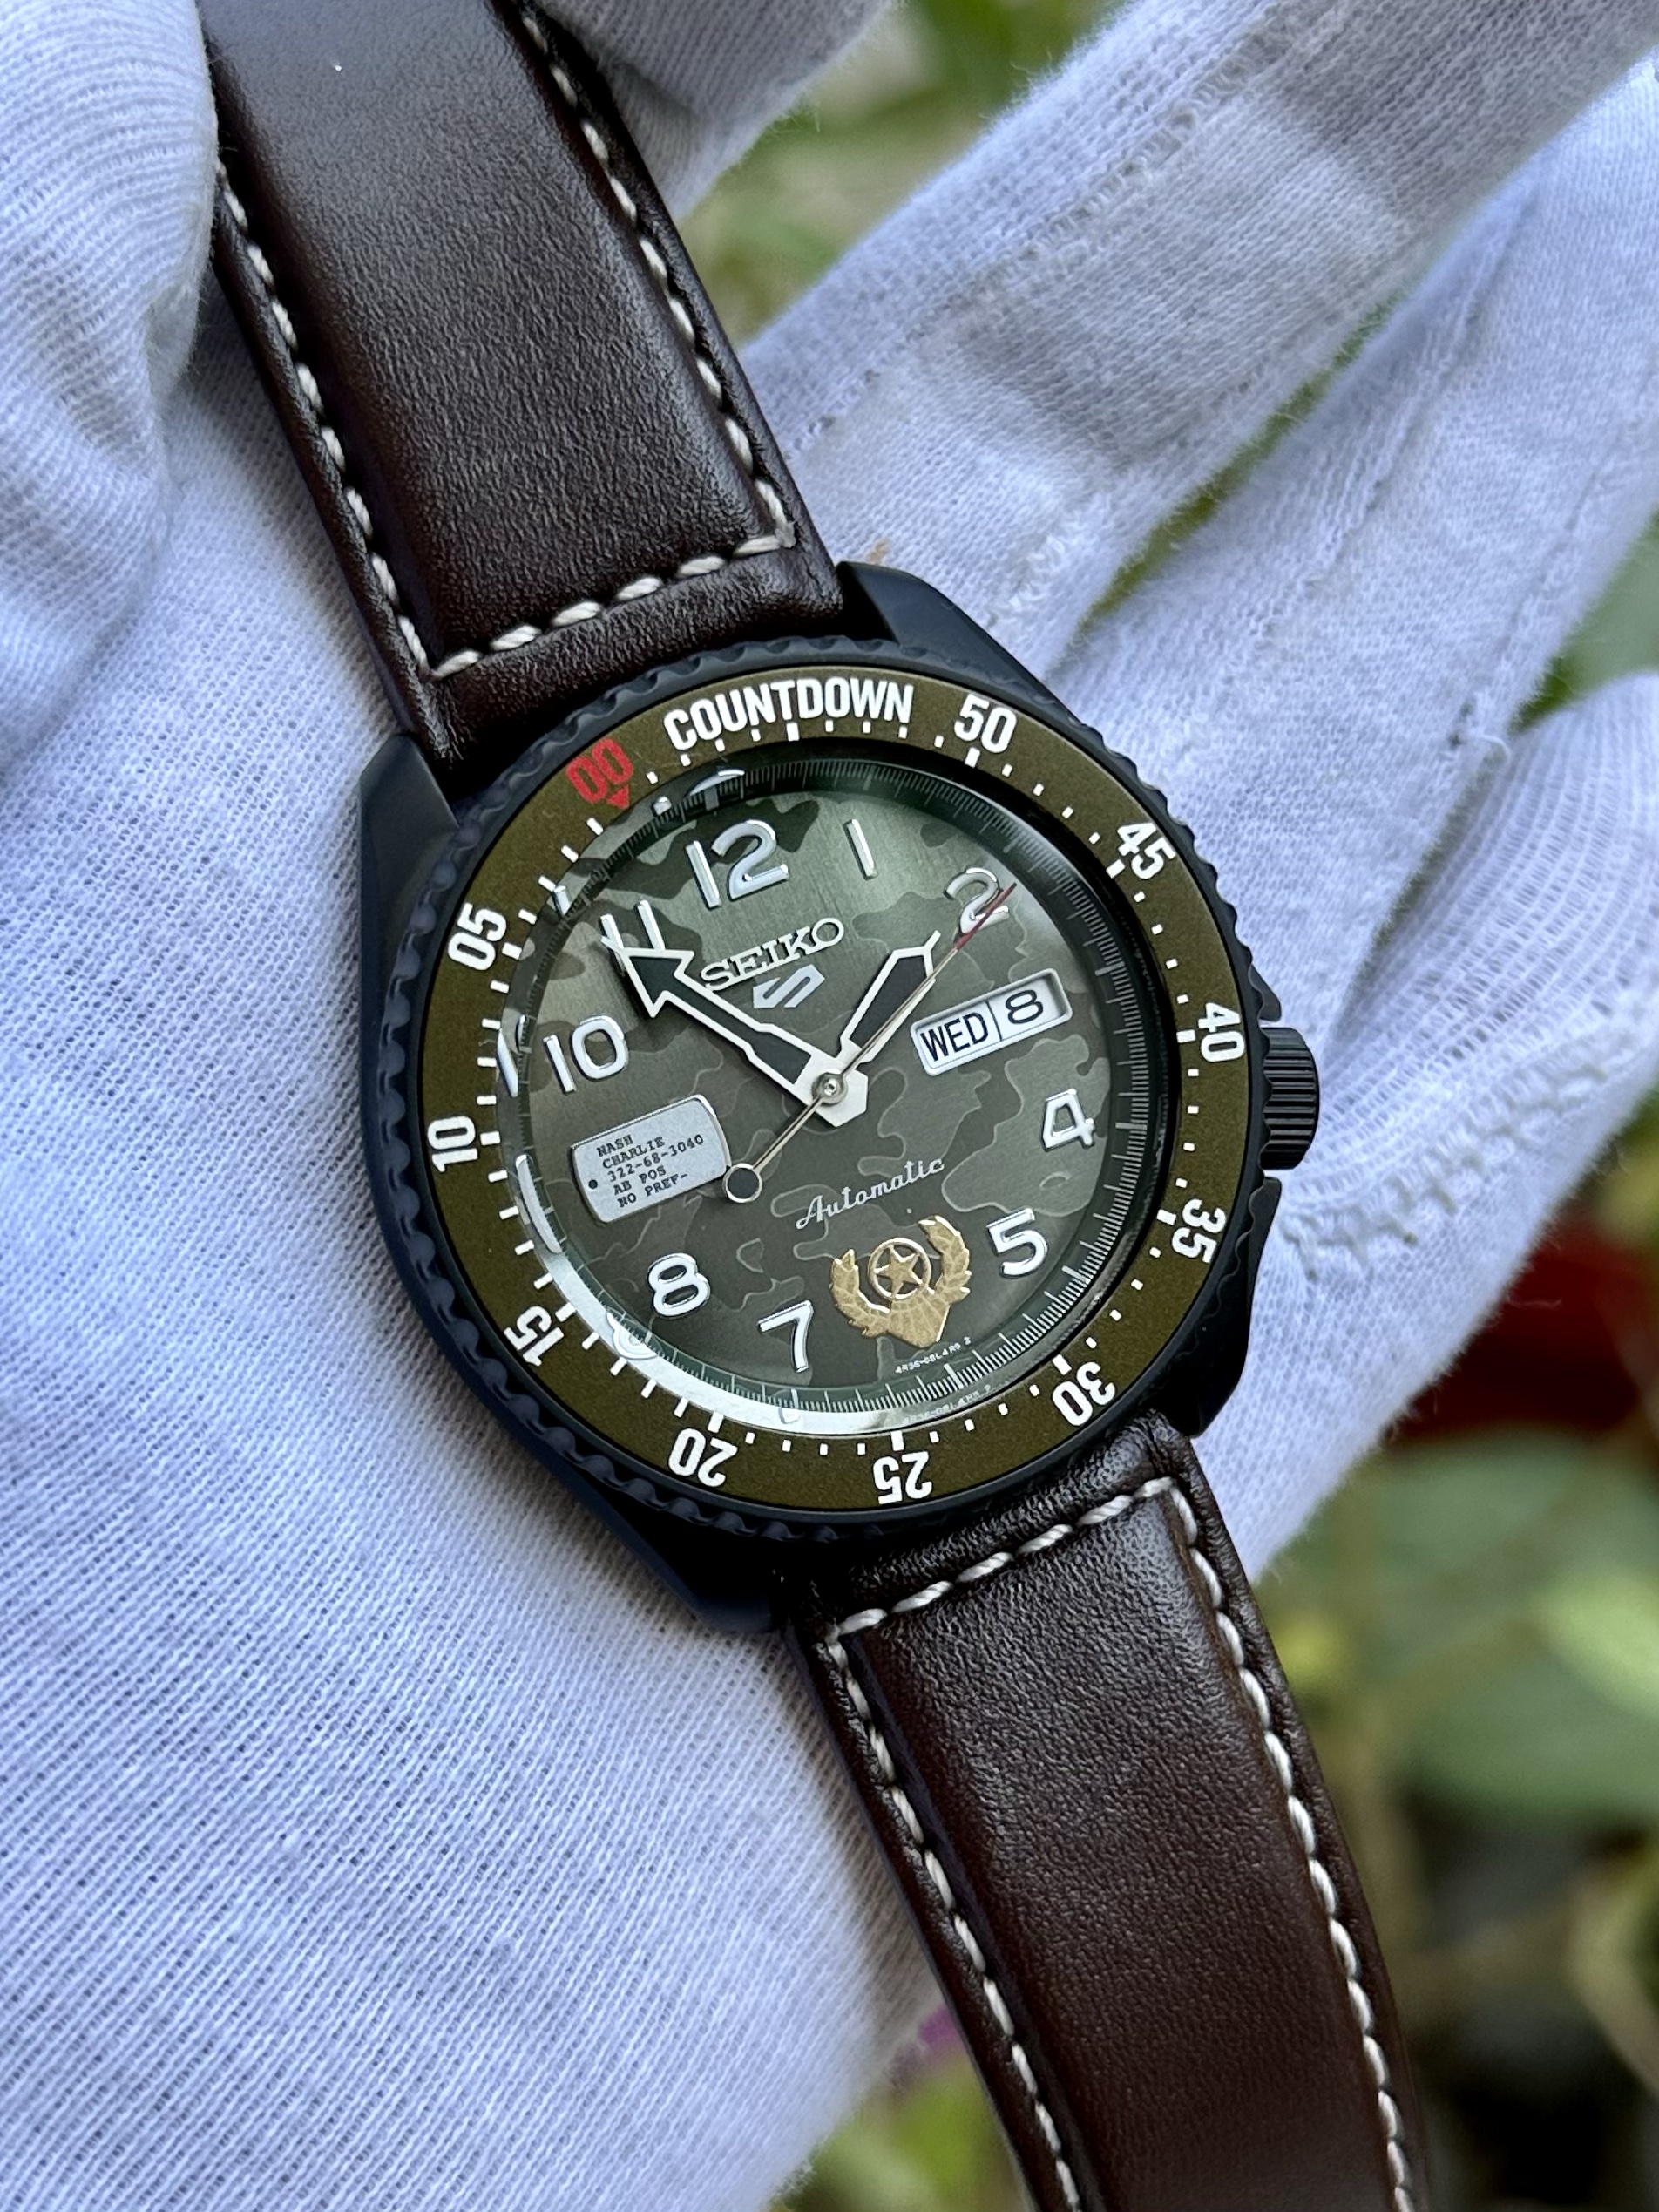 SEIKO 5 Street fighter Guile Japan Limited | Daim Traders